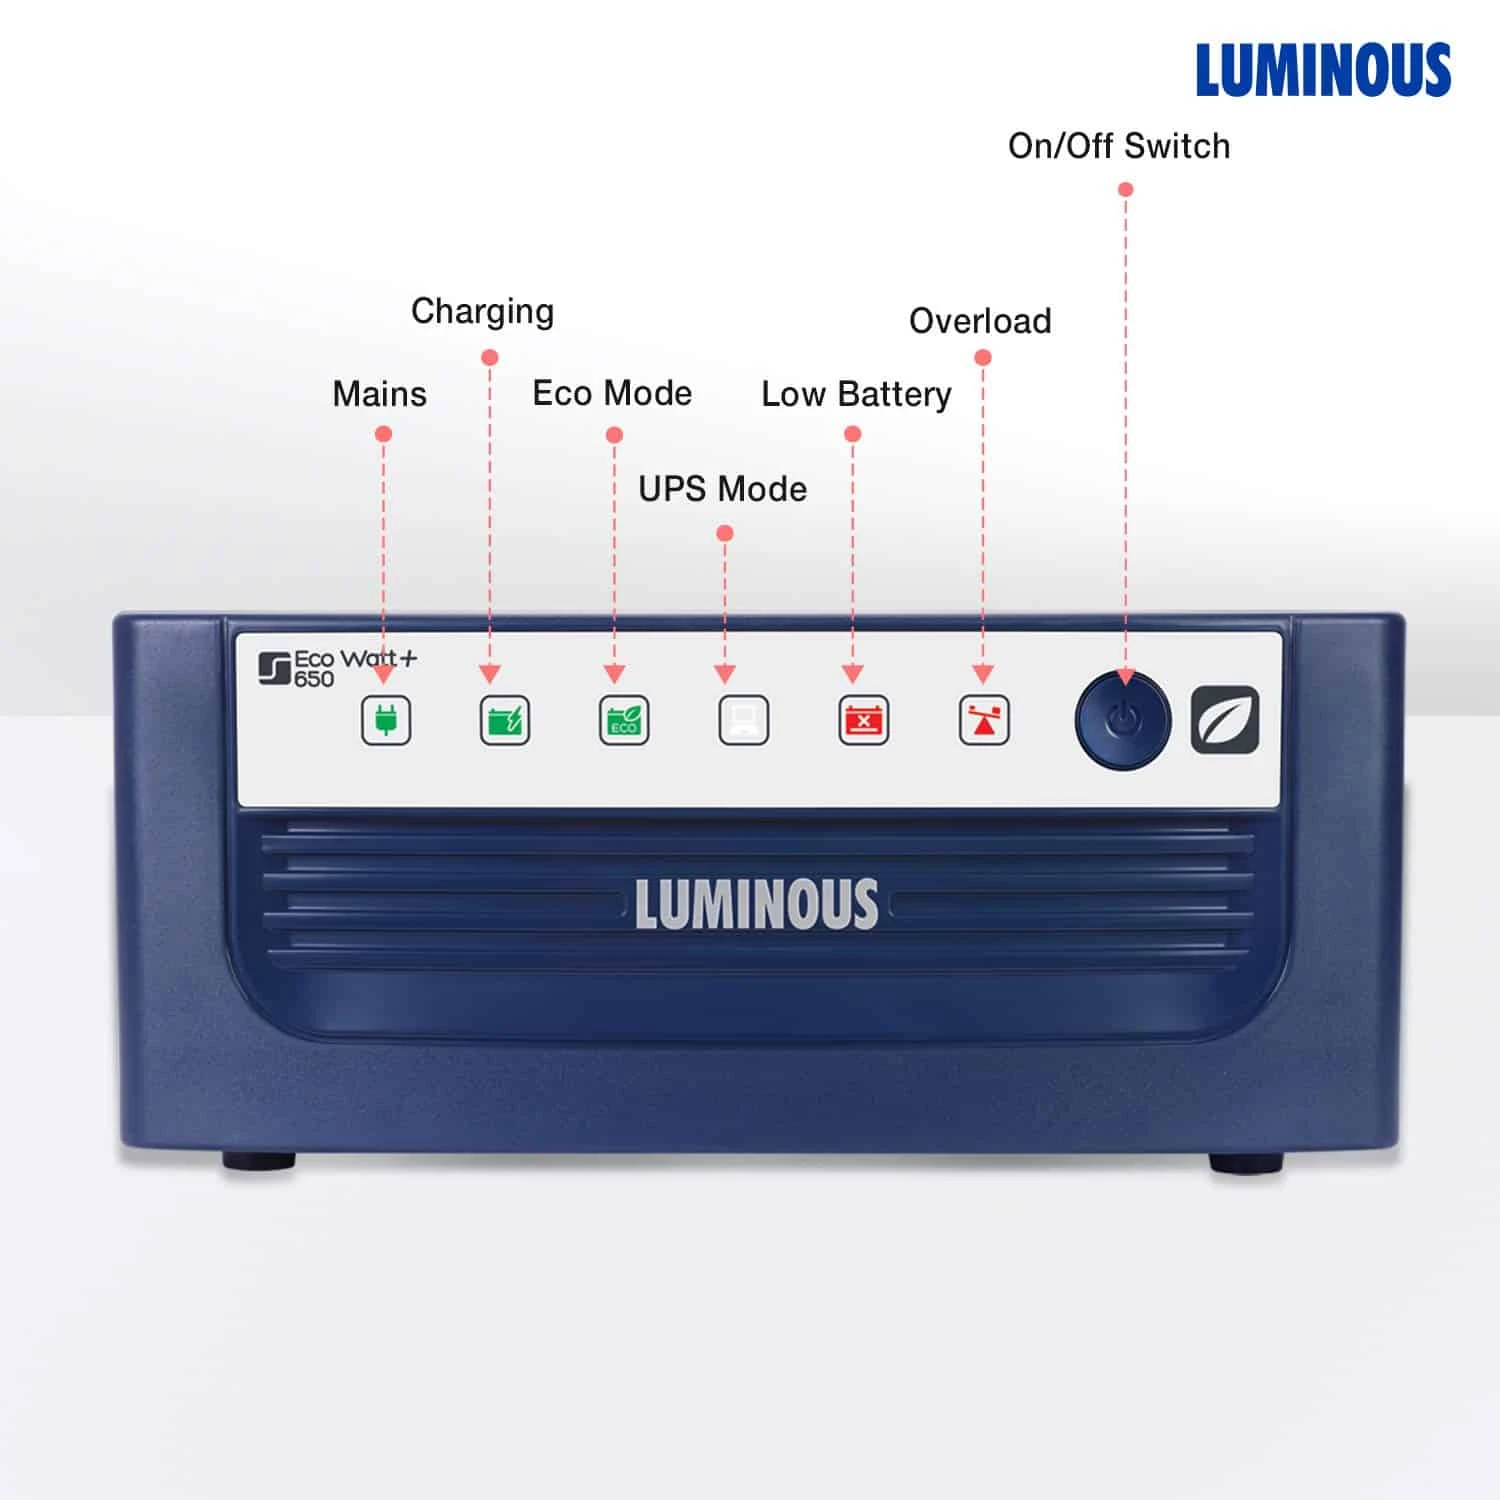 Luminous Eco Watt+ 650 Square Wave Inverter for Home, Office and Shops